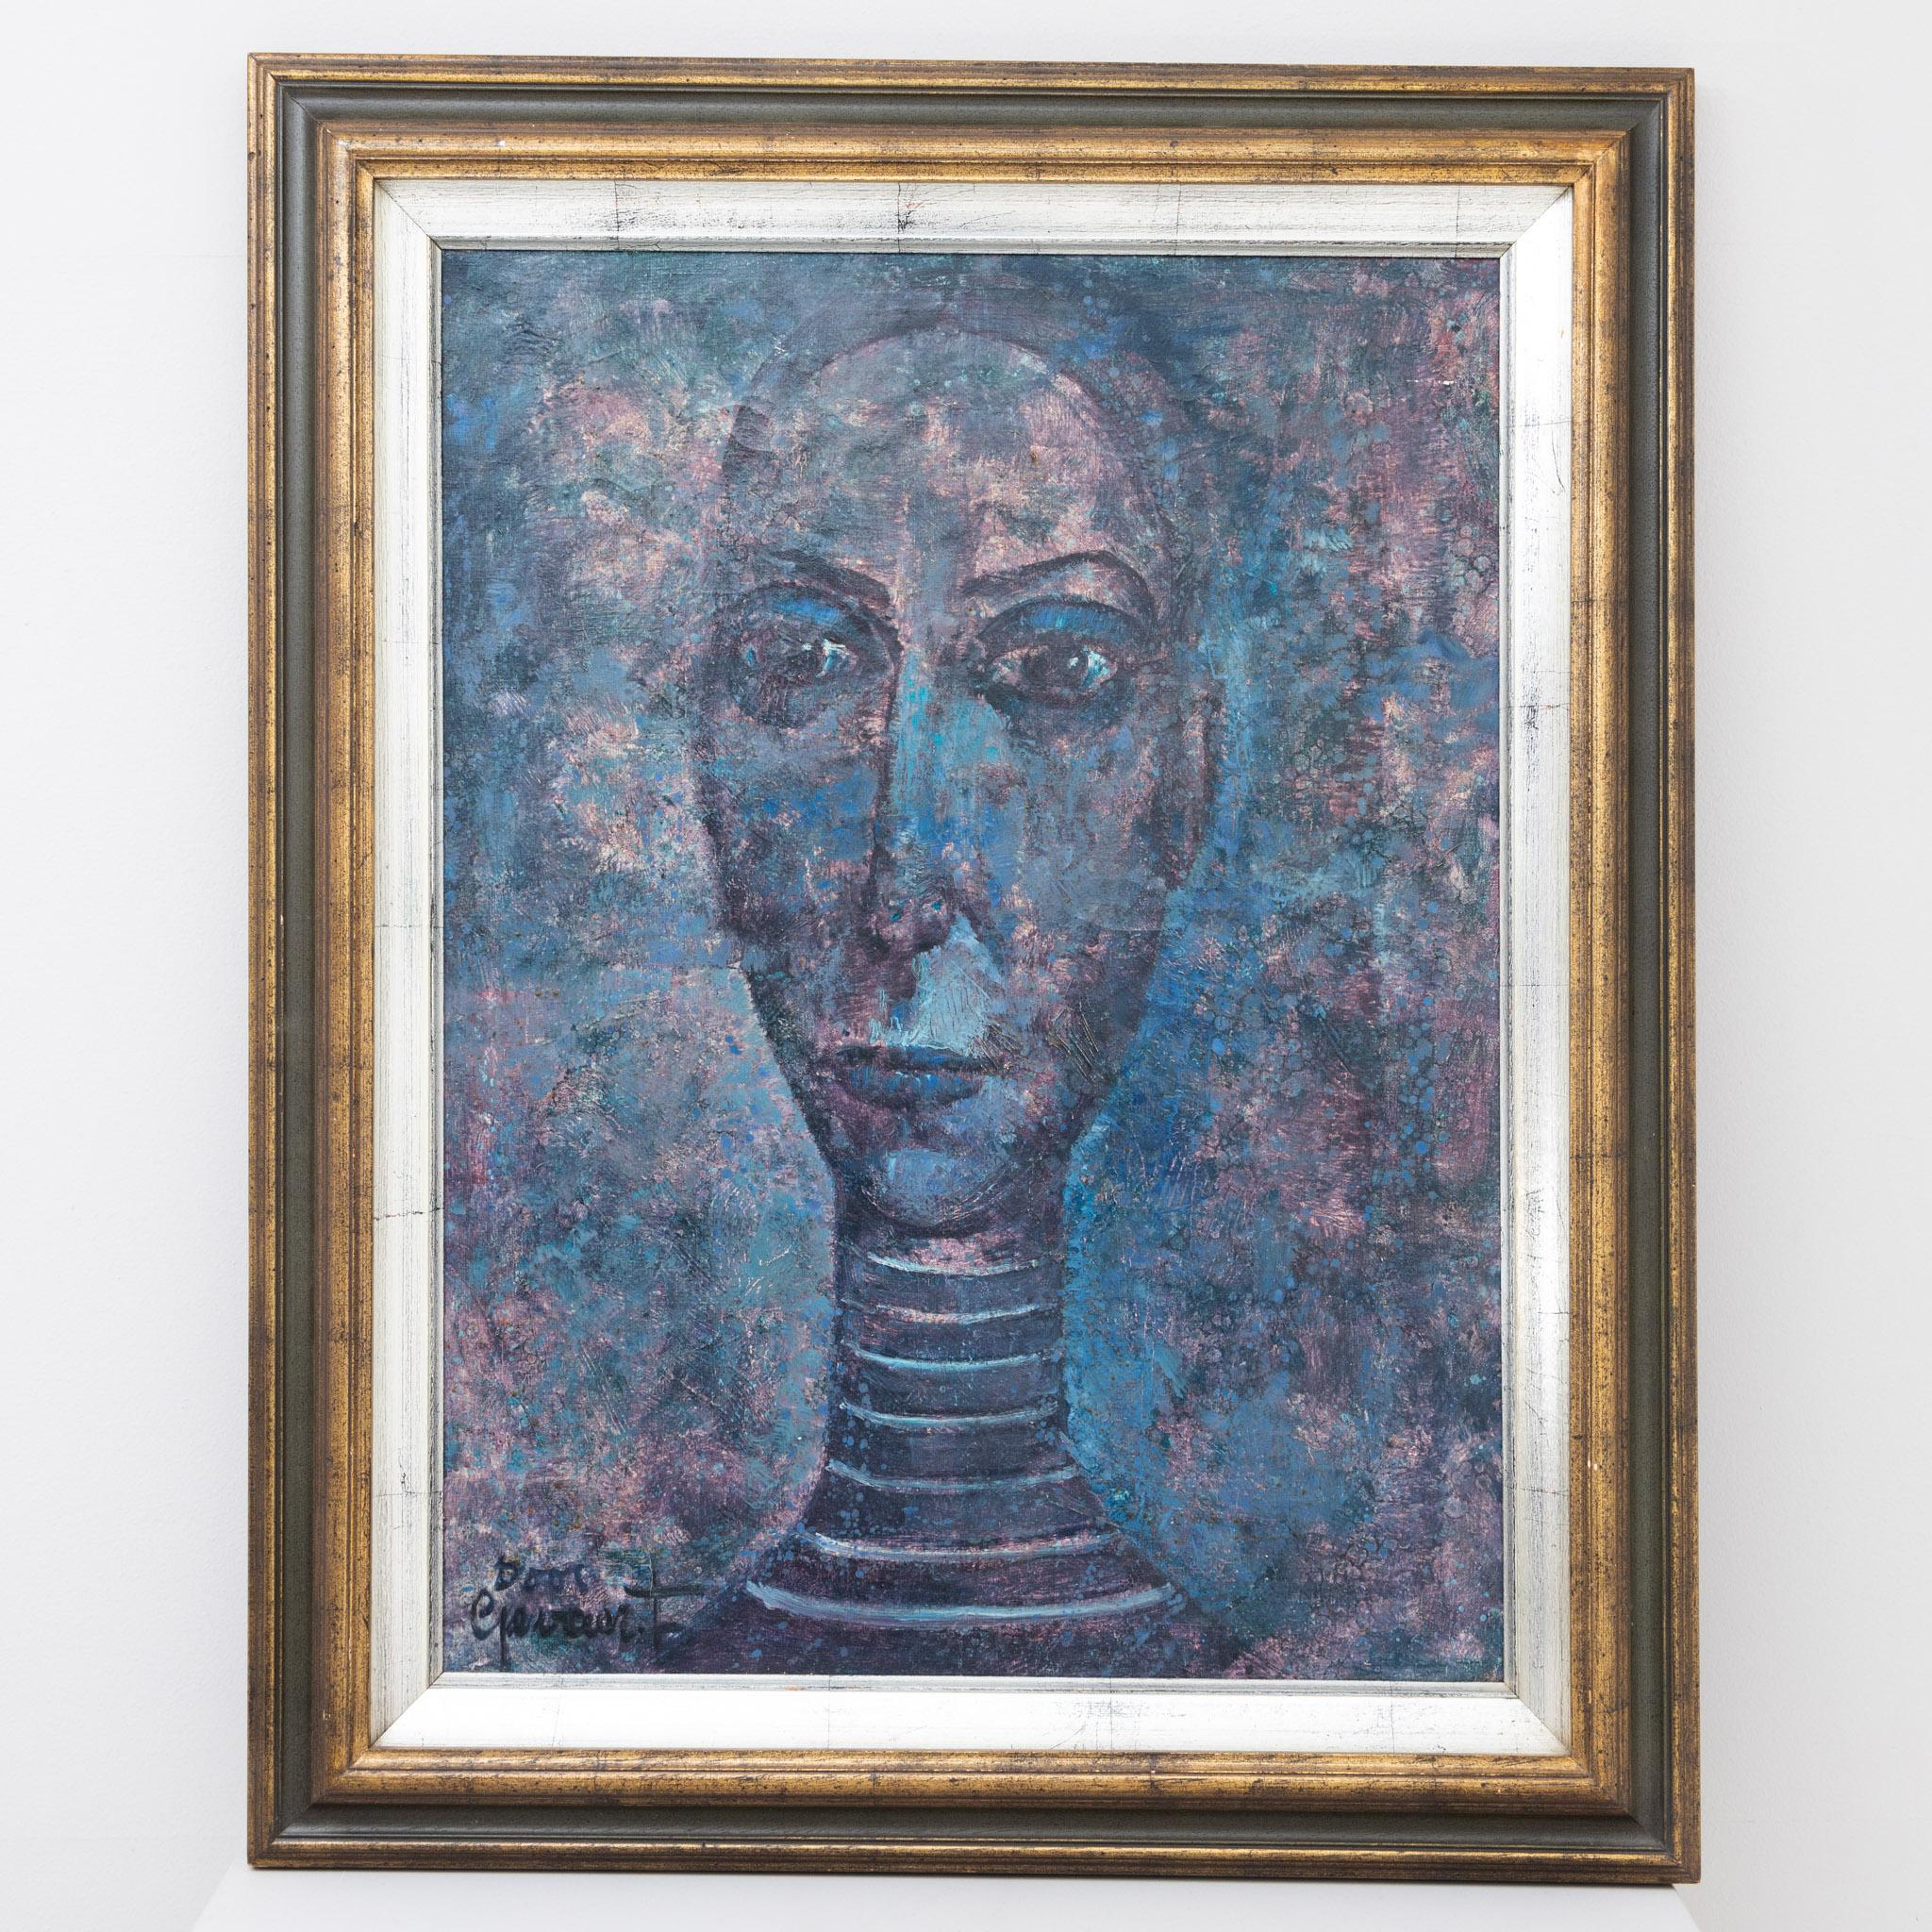 Depiction of a woman's head with necklace in impasto color application in blue and pink tones. Bottom left signed Door Gevaert. Image size: 78 x 58 cm. Oil on canvas; profiled wooden frame.